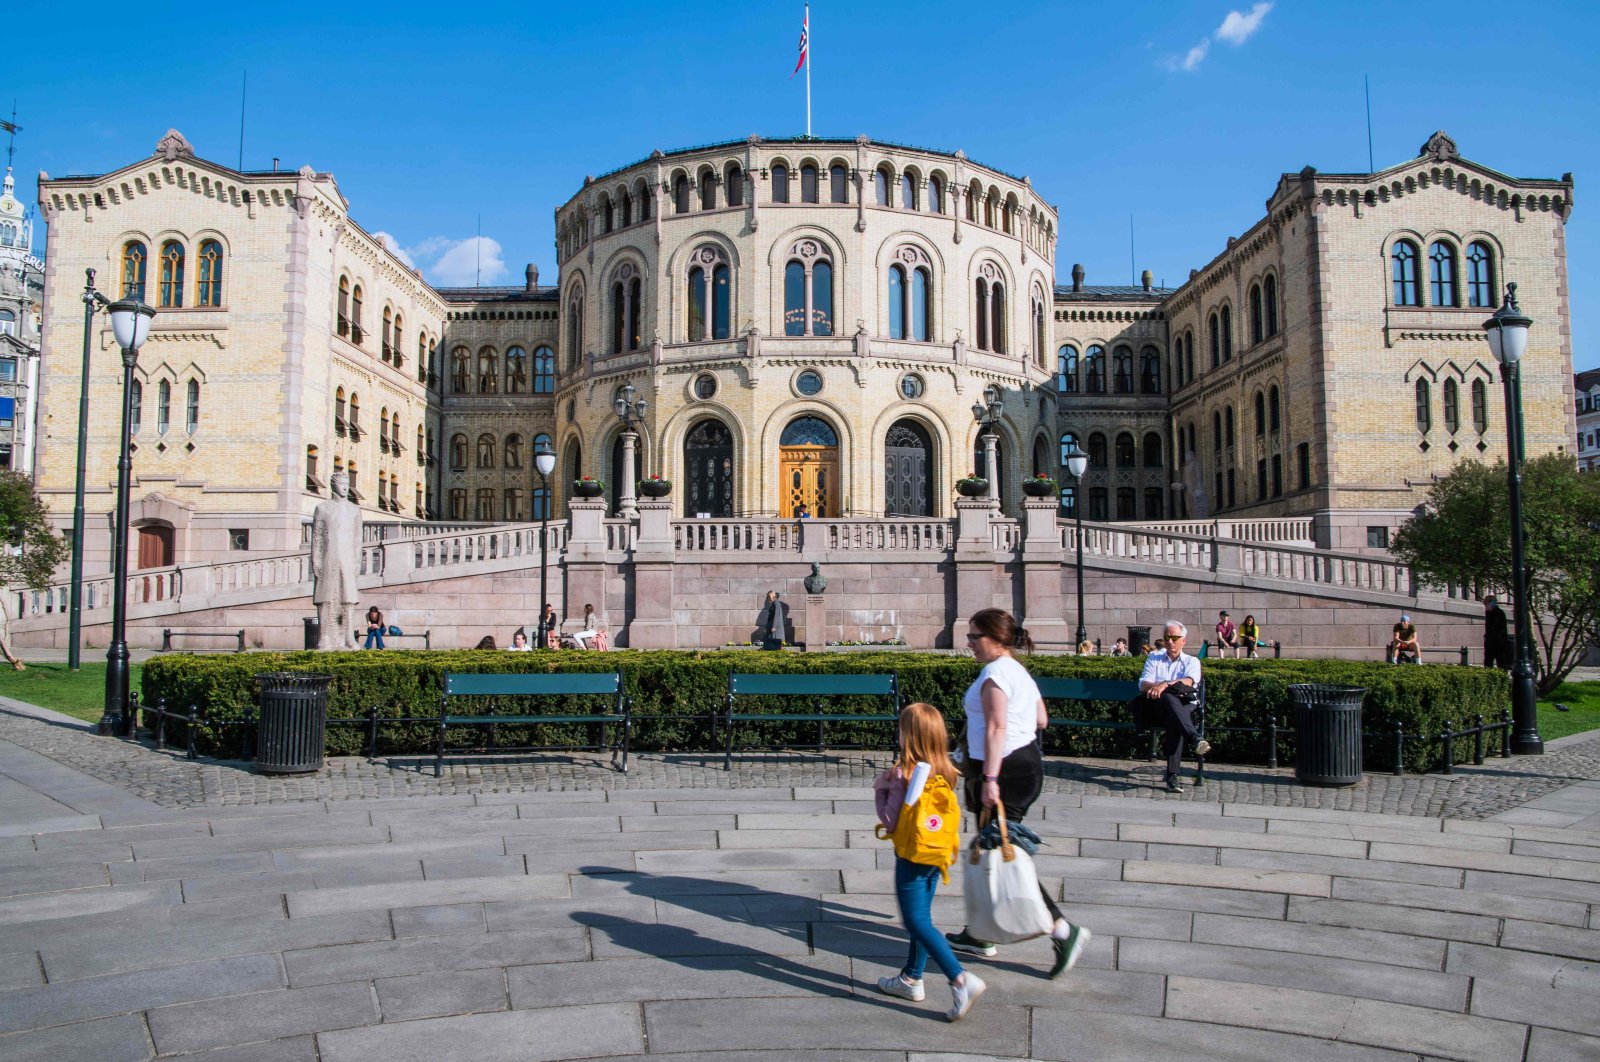 The Norwegian Parliament building, in Oslo, Norway, April 29, 2019. (AFP Photo)